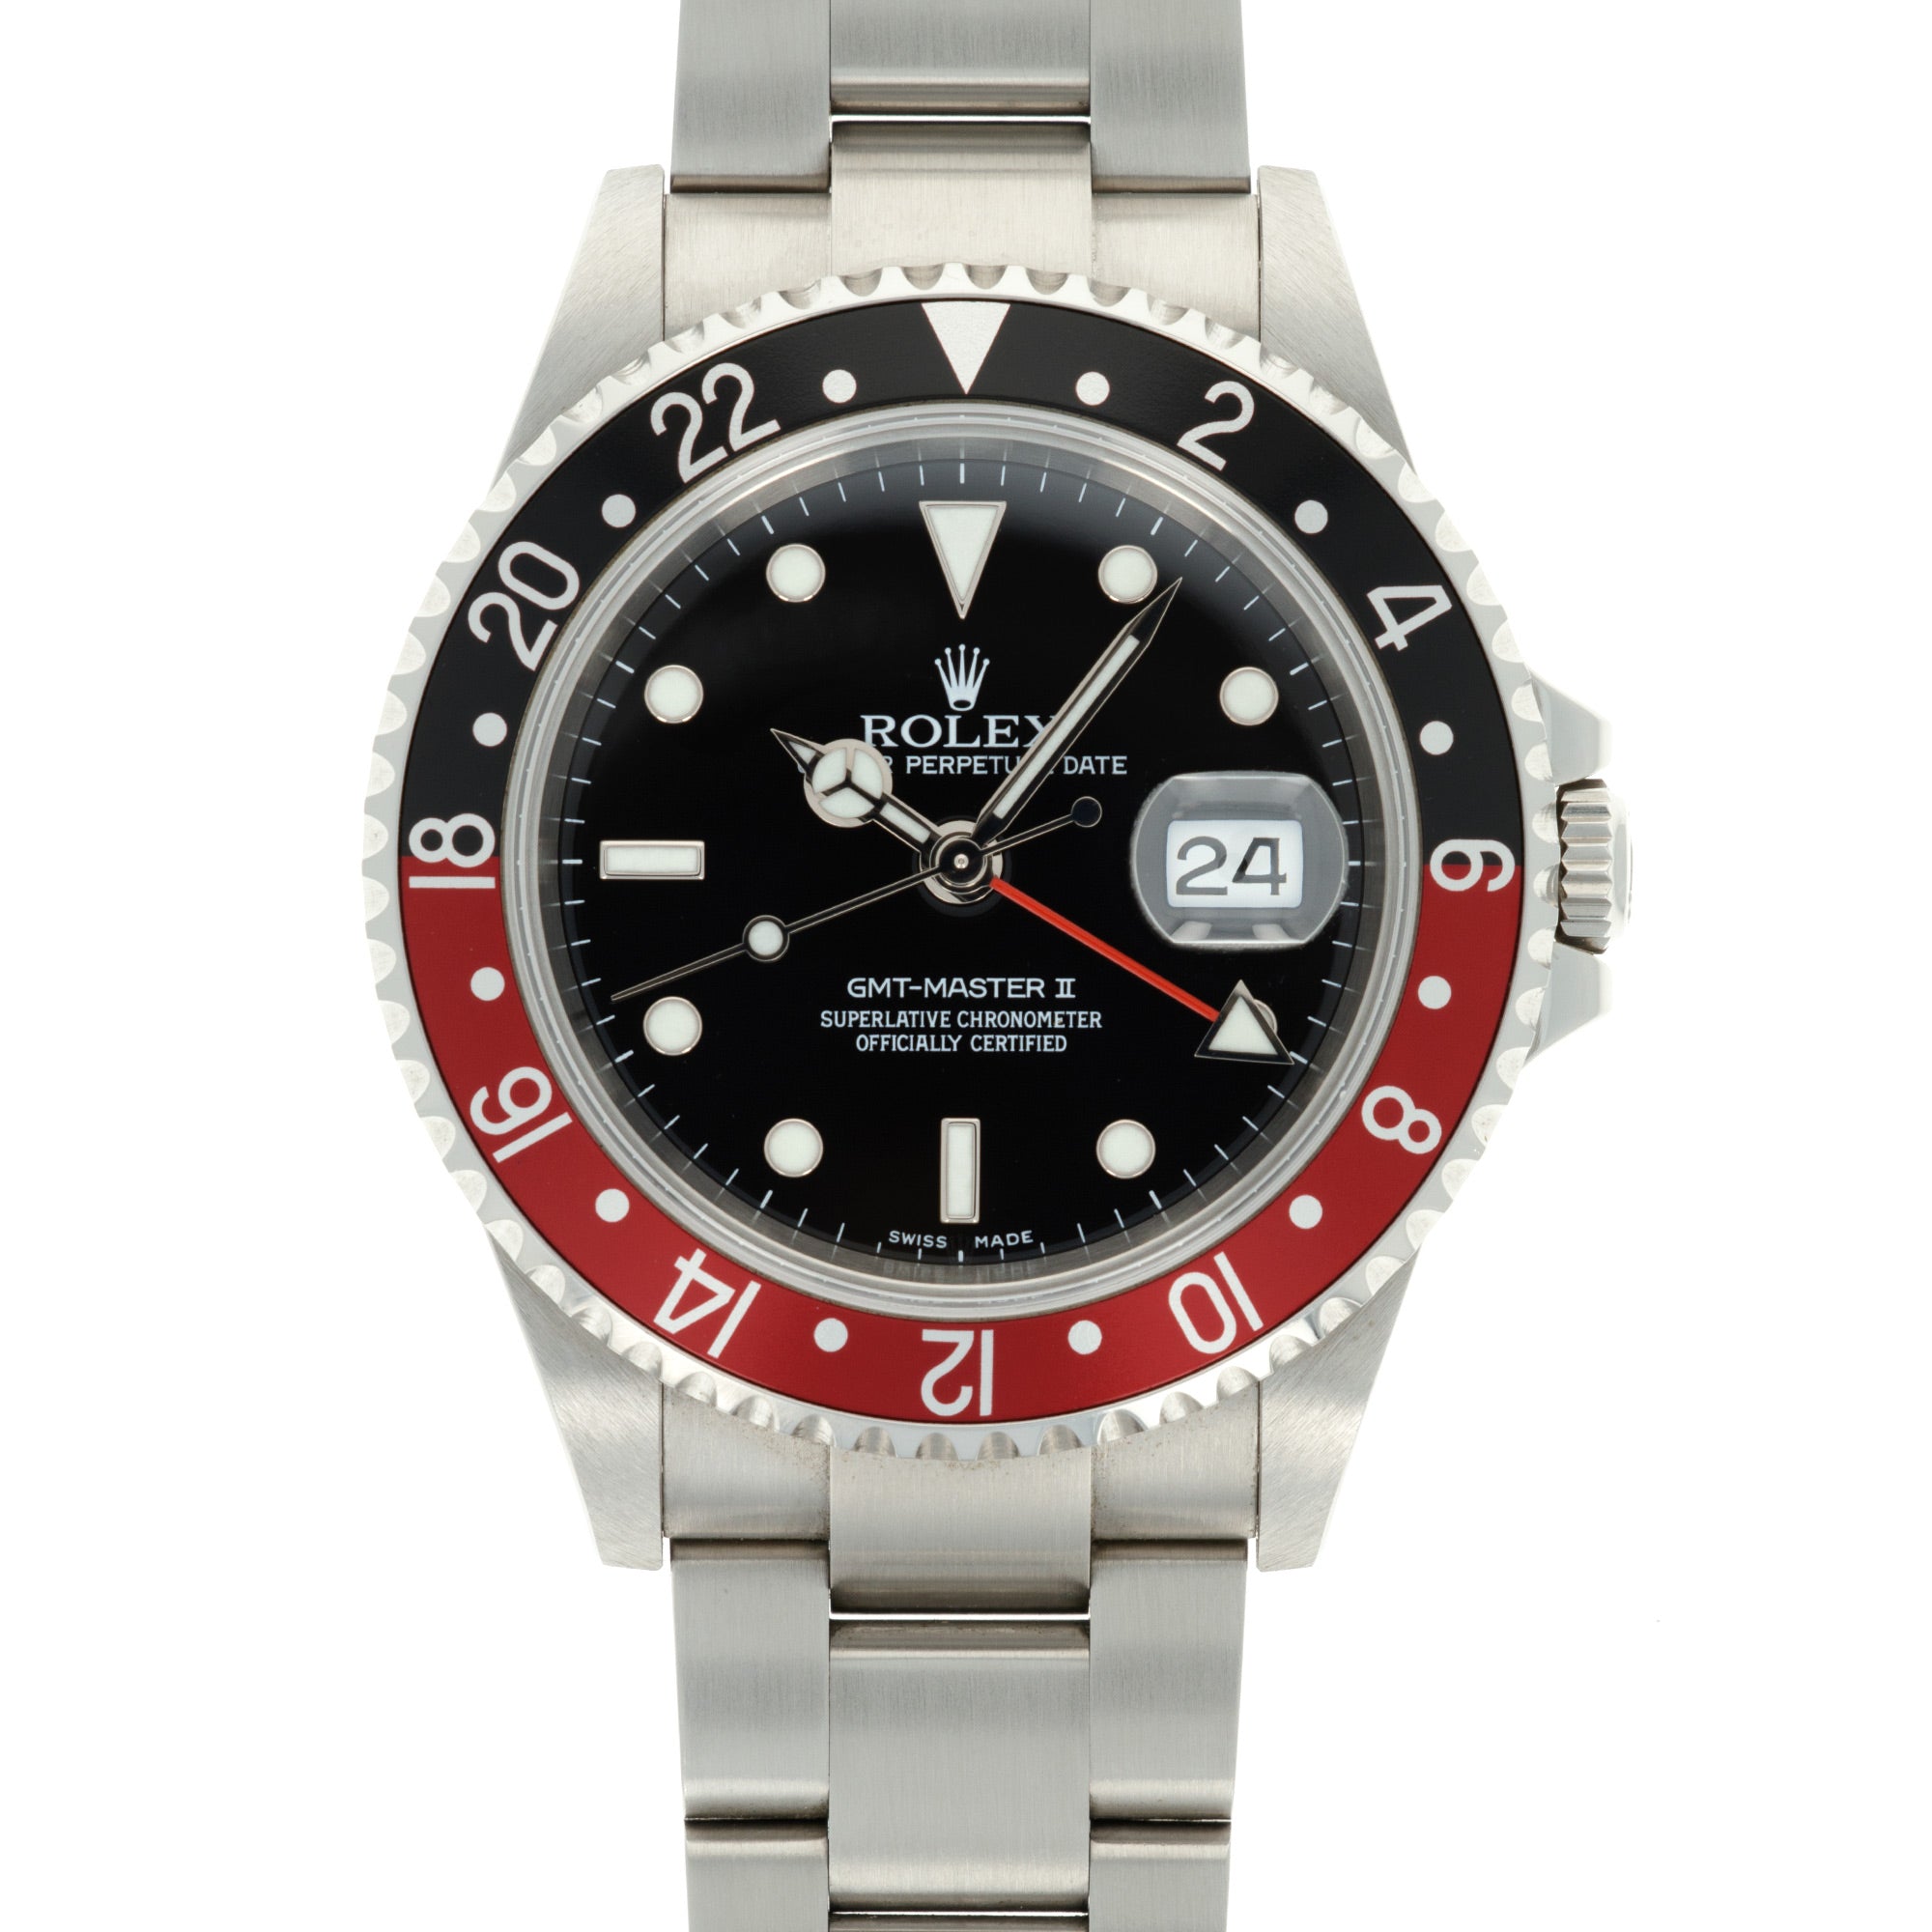 Rolex - Rolex Steel Coke GMT-Master Ref. 16710 in Like New, Old Stock Condition - The Keystone Watches